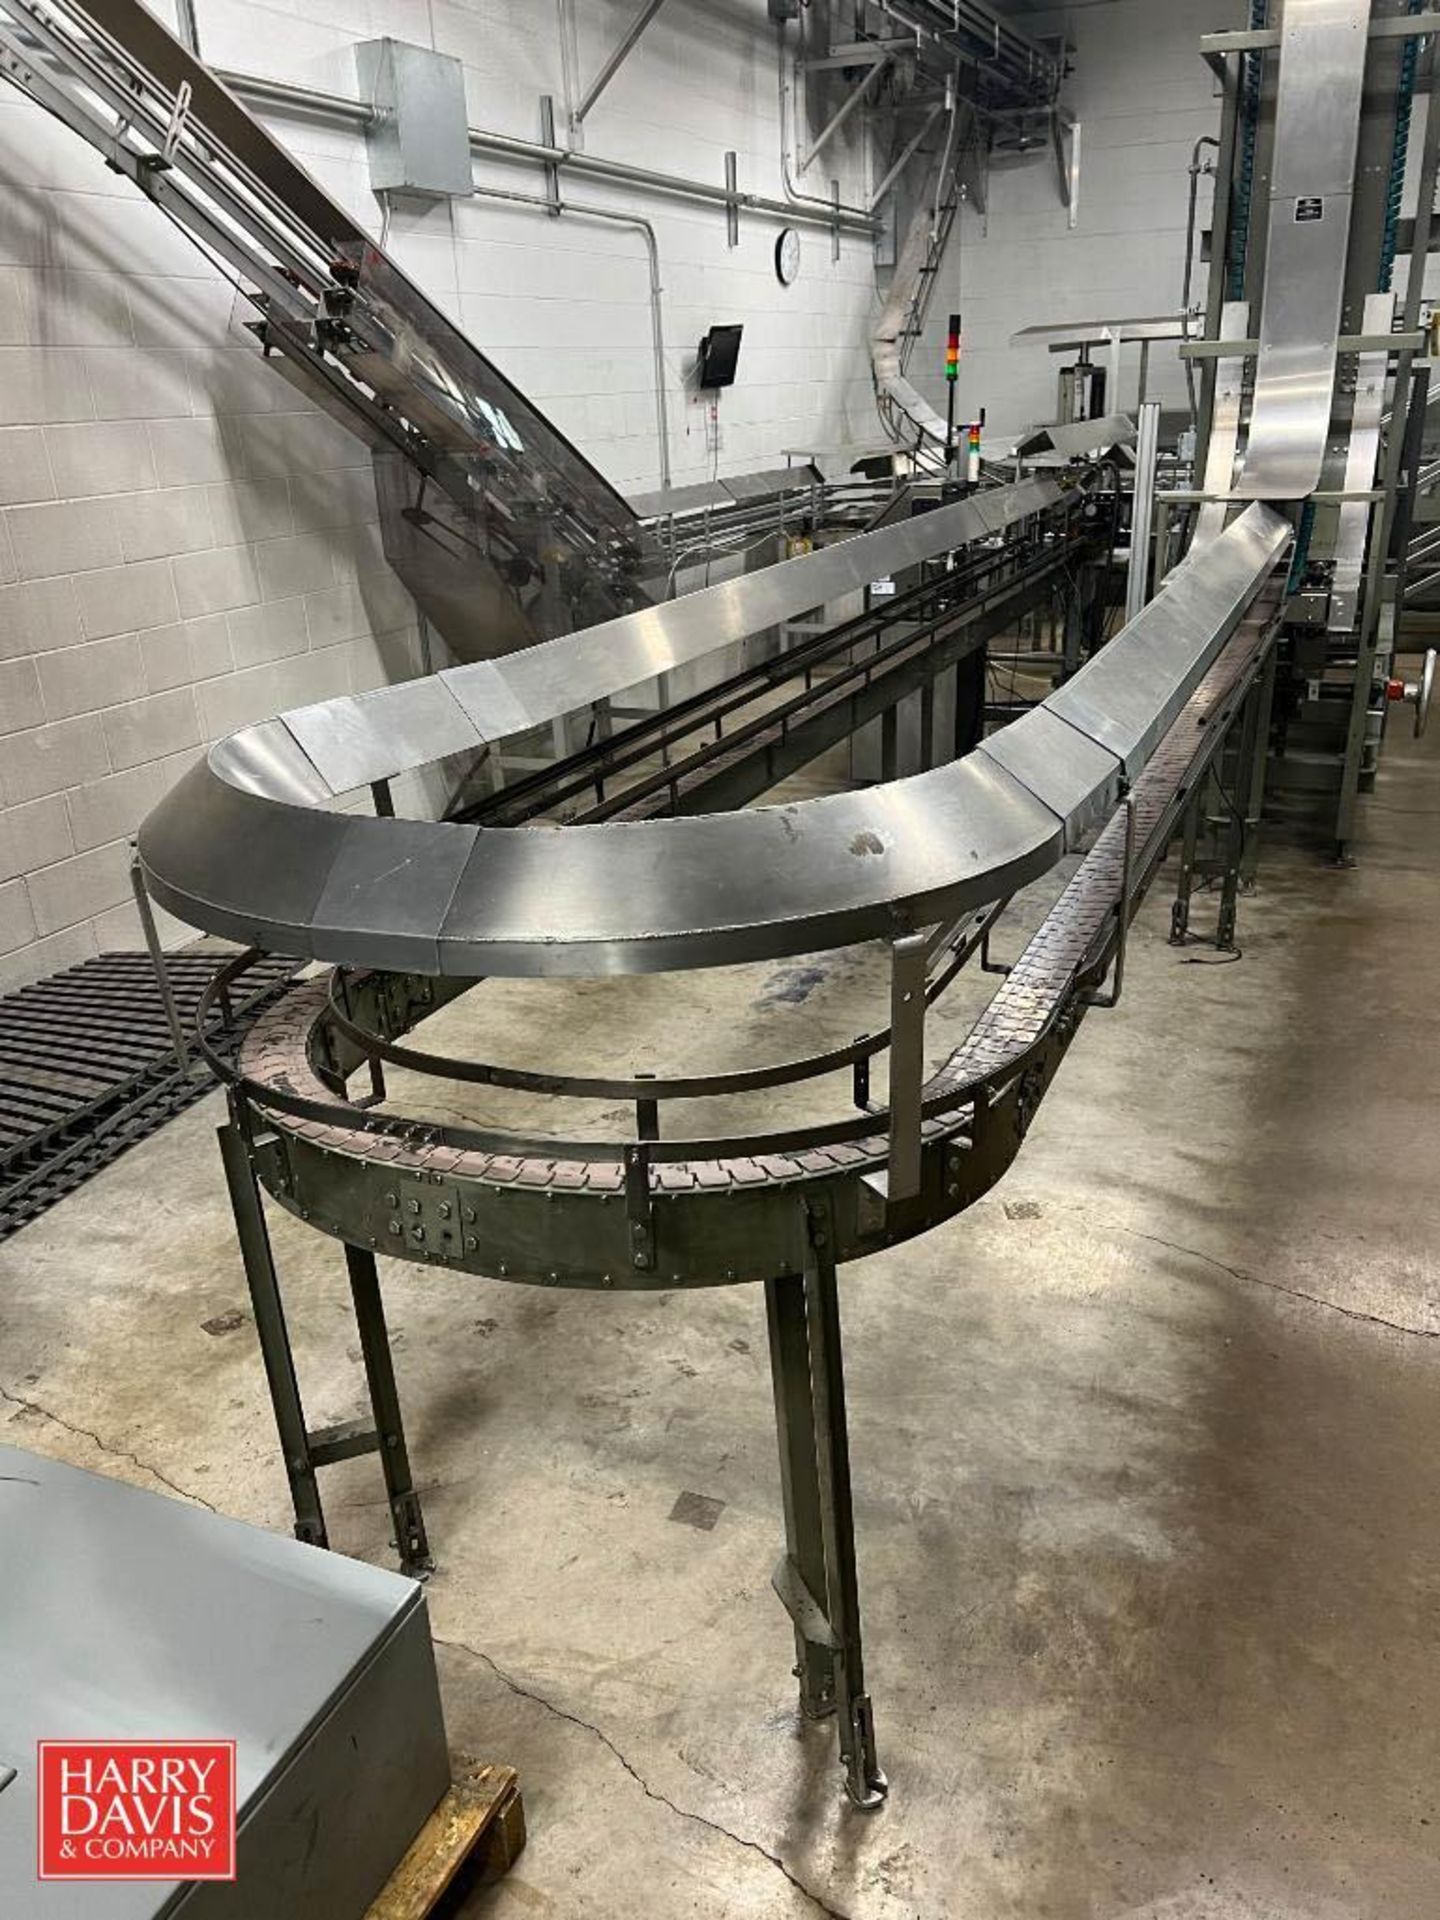 Serpentine S/S Power Conveyor with S/S Hood, Dimensions = 40' x 3.5" - Rigging Fee: $1,200